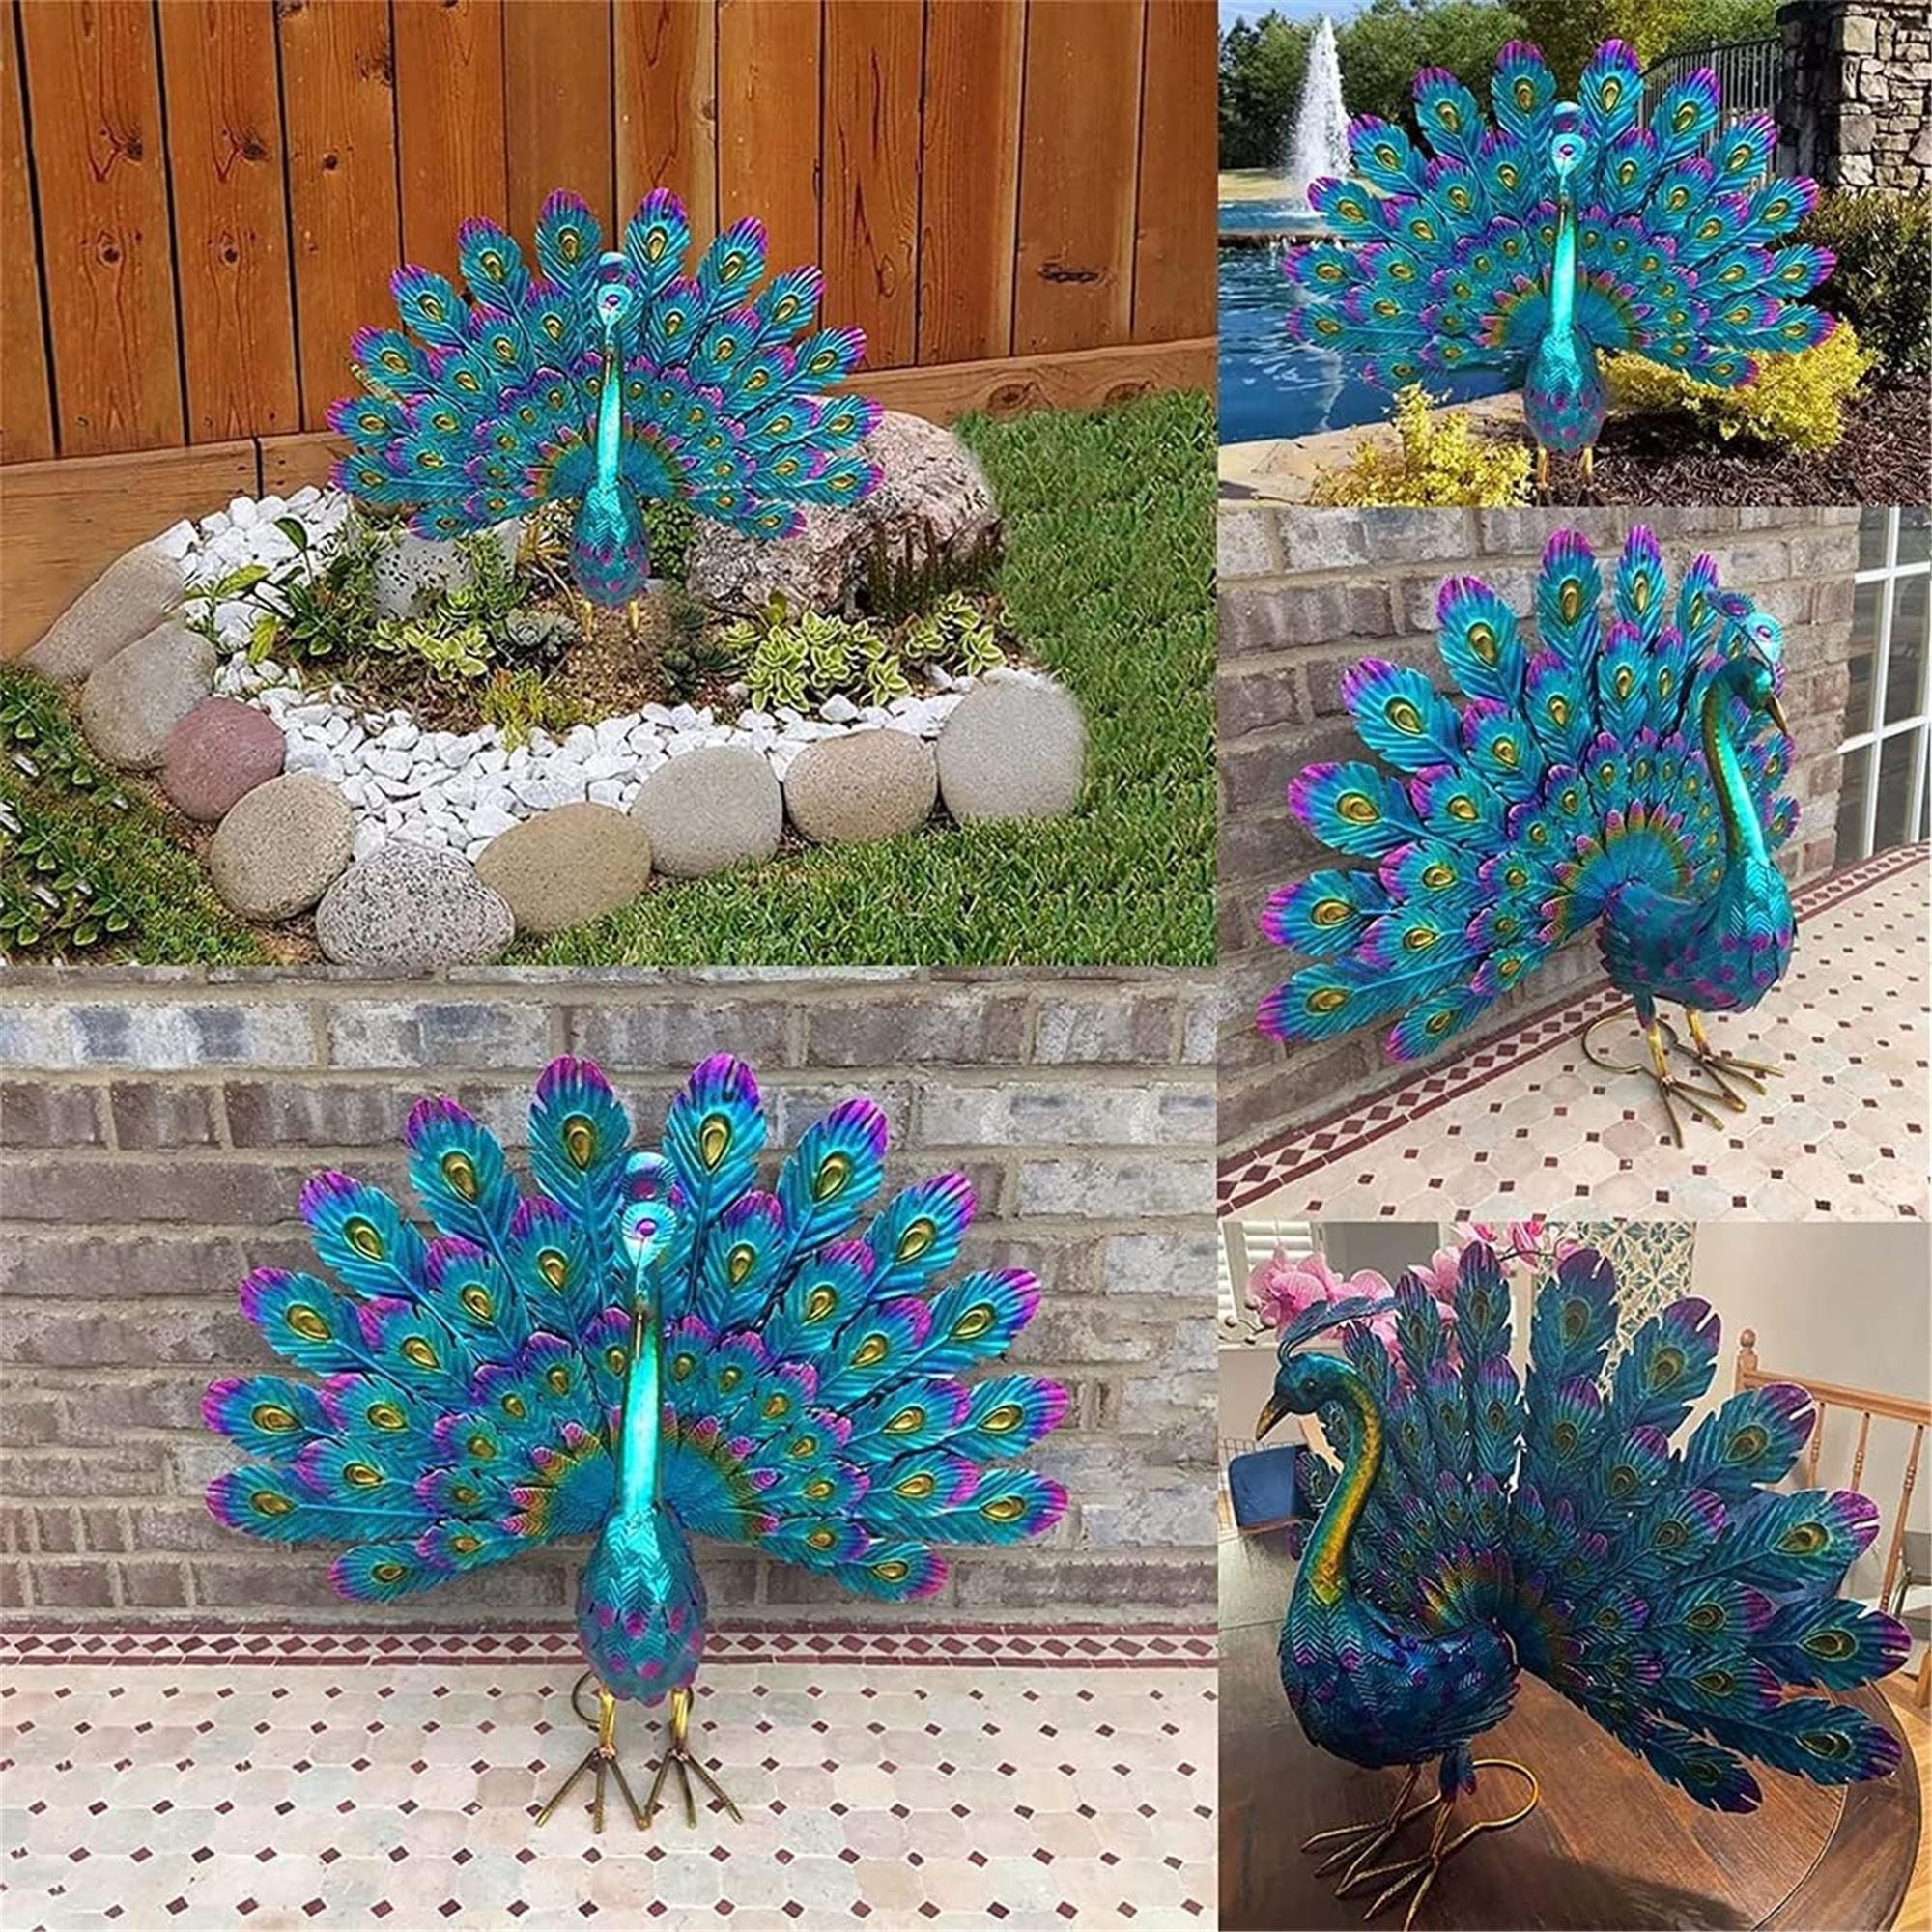 Christmas Decorations Faux Peacock Ornaments Glitter Blue Peacock Ornaments  With Tail Feather Clip-On Decor Set For Christmas - AliExpress